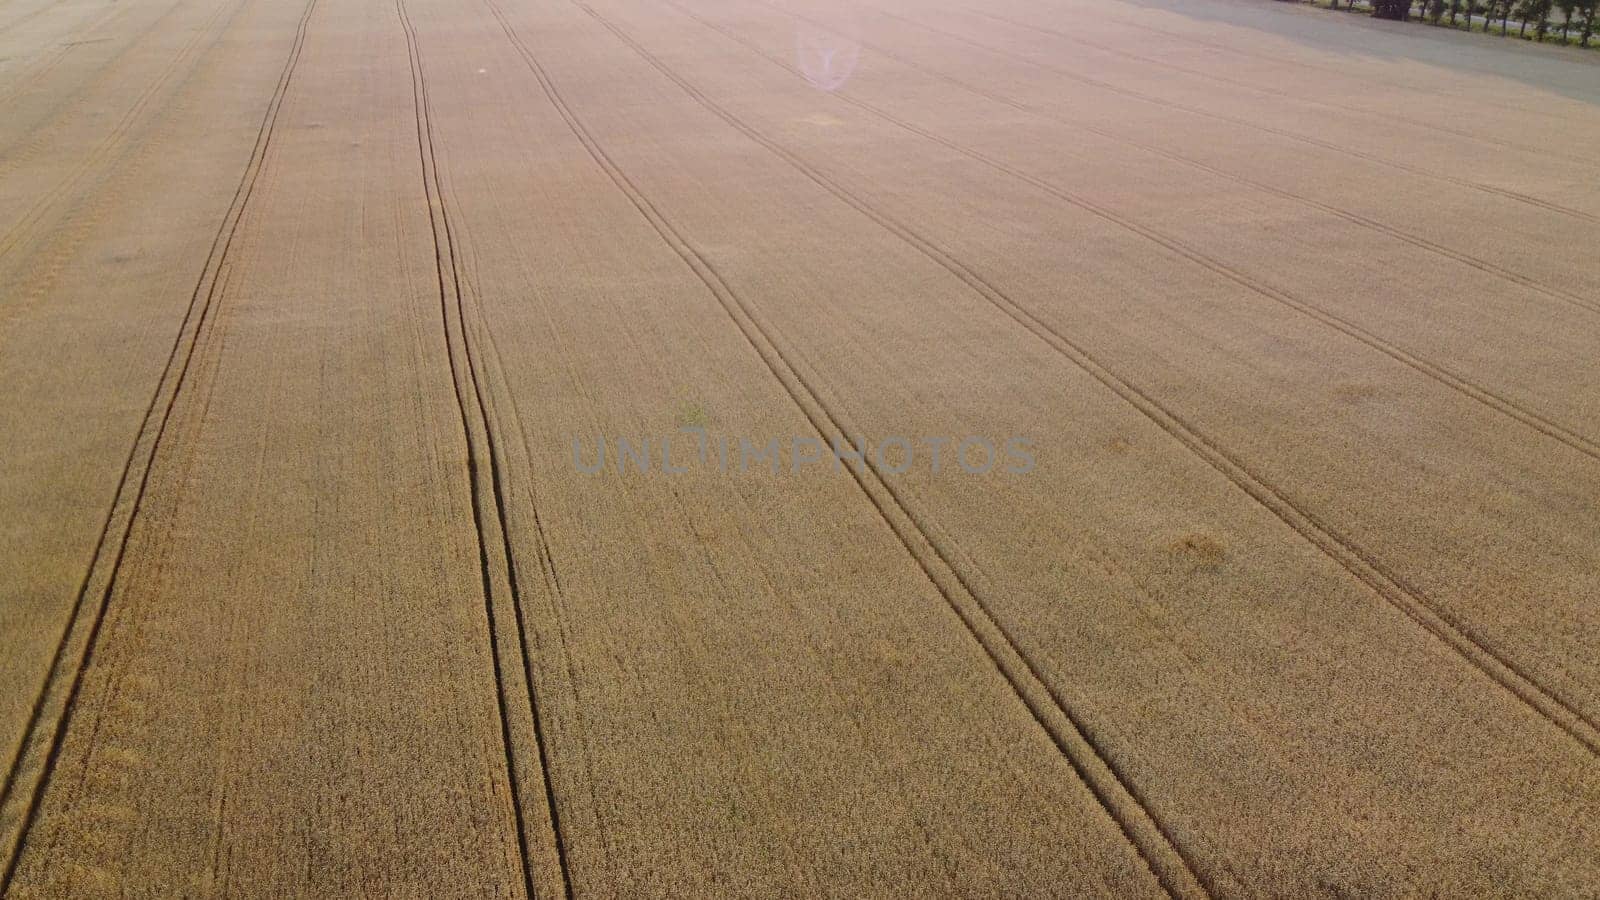 Wheat field. Flying over wheat field ears of mature ripe wheat. Wheat grain crop harvest. Sun light. Industrial grain cultivation. Agricultural agrarian panoramic landscape. Aerial drone view